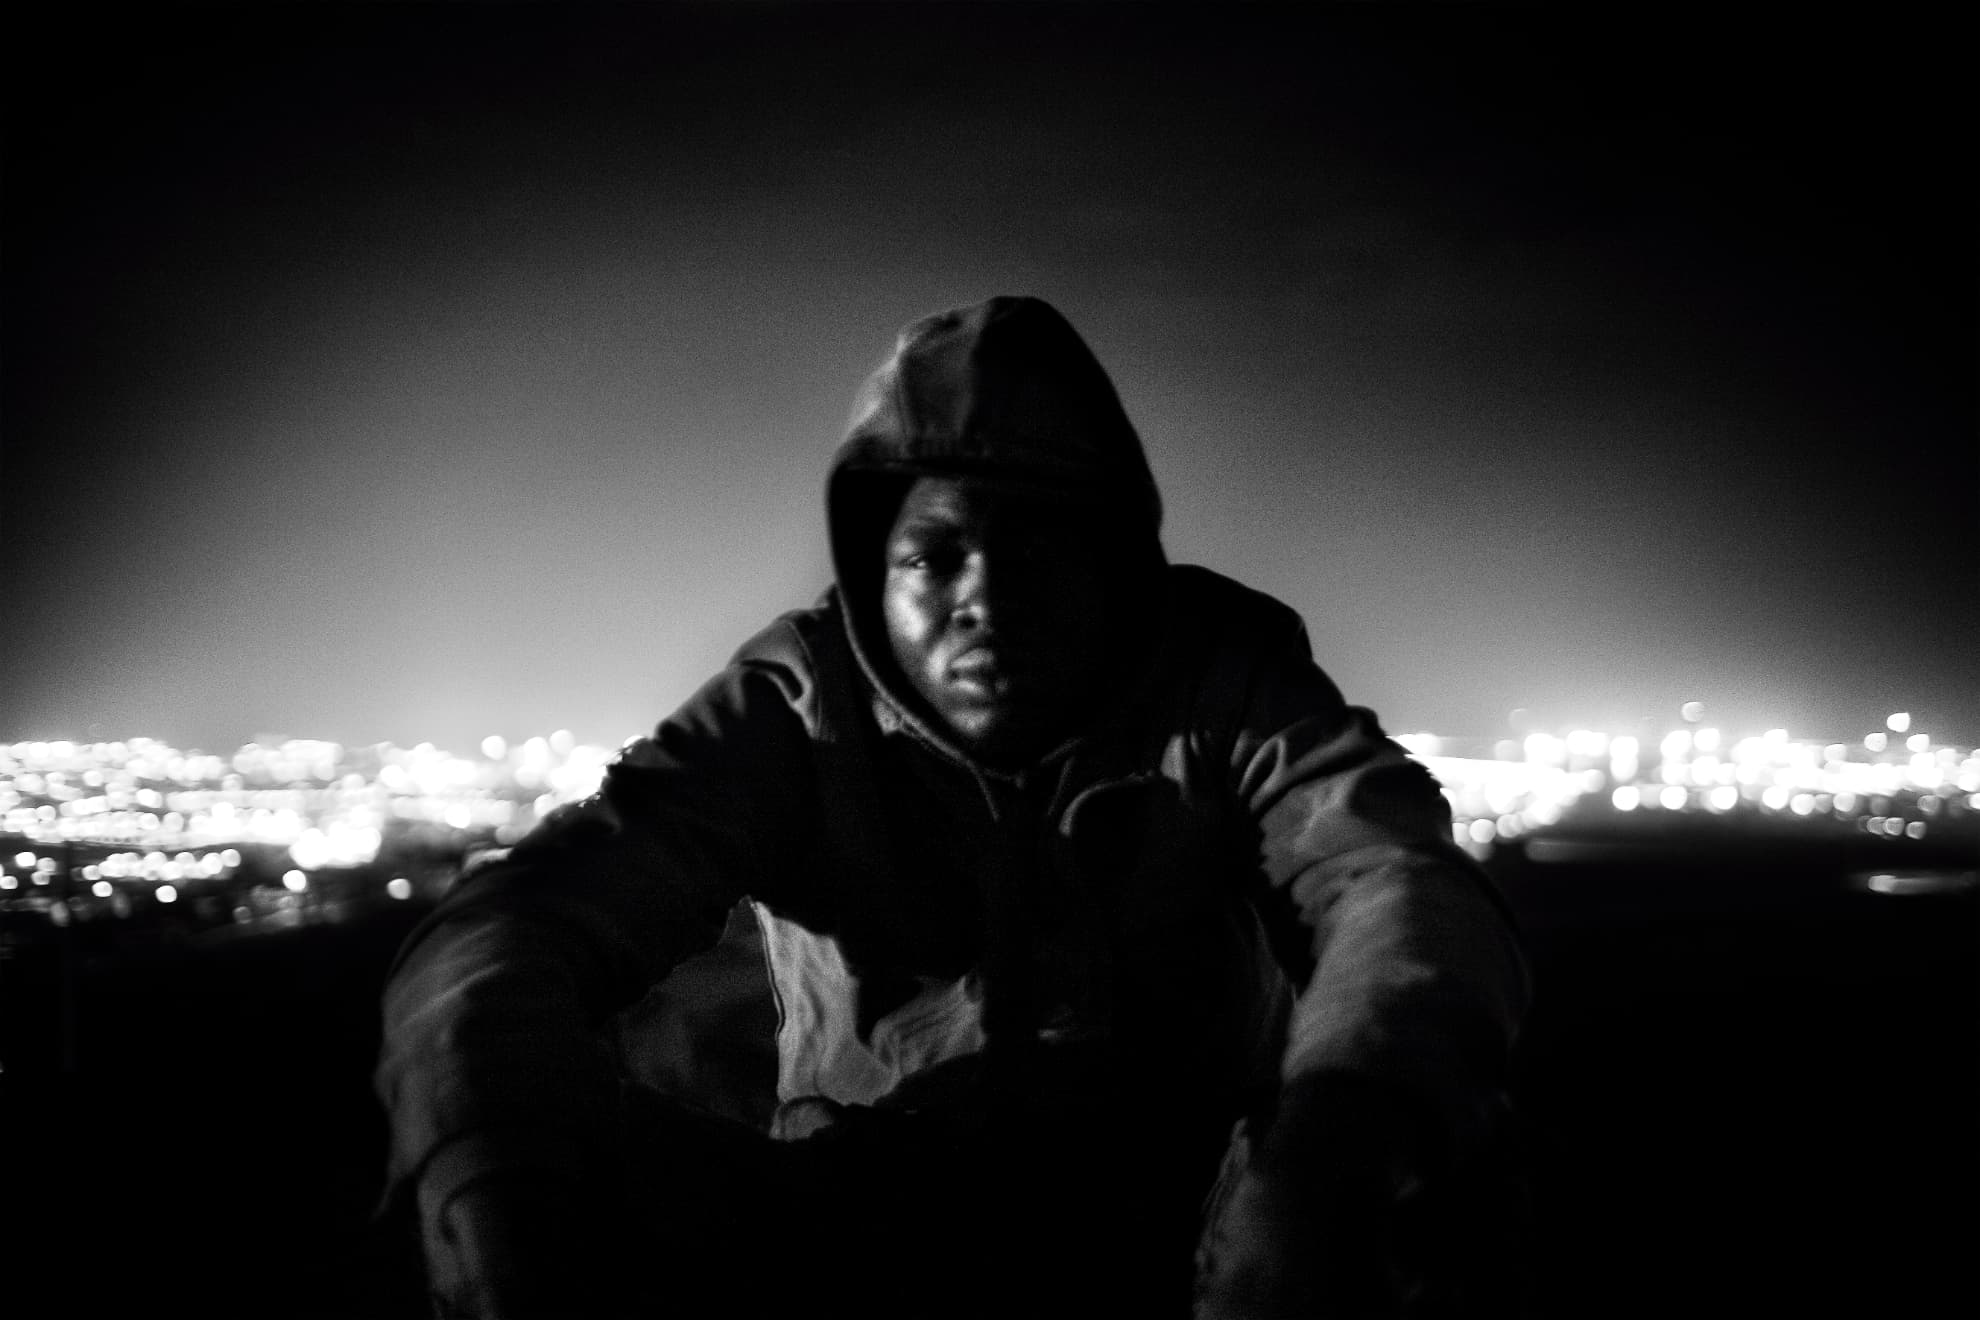 Narcisse, from Cameroon, moments before attempting to jump the fence. In the background, the city lights of Melilla. Narcisse was able to cross over to Melilla that night.